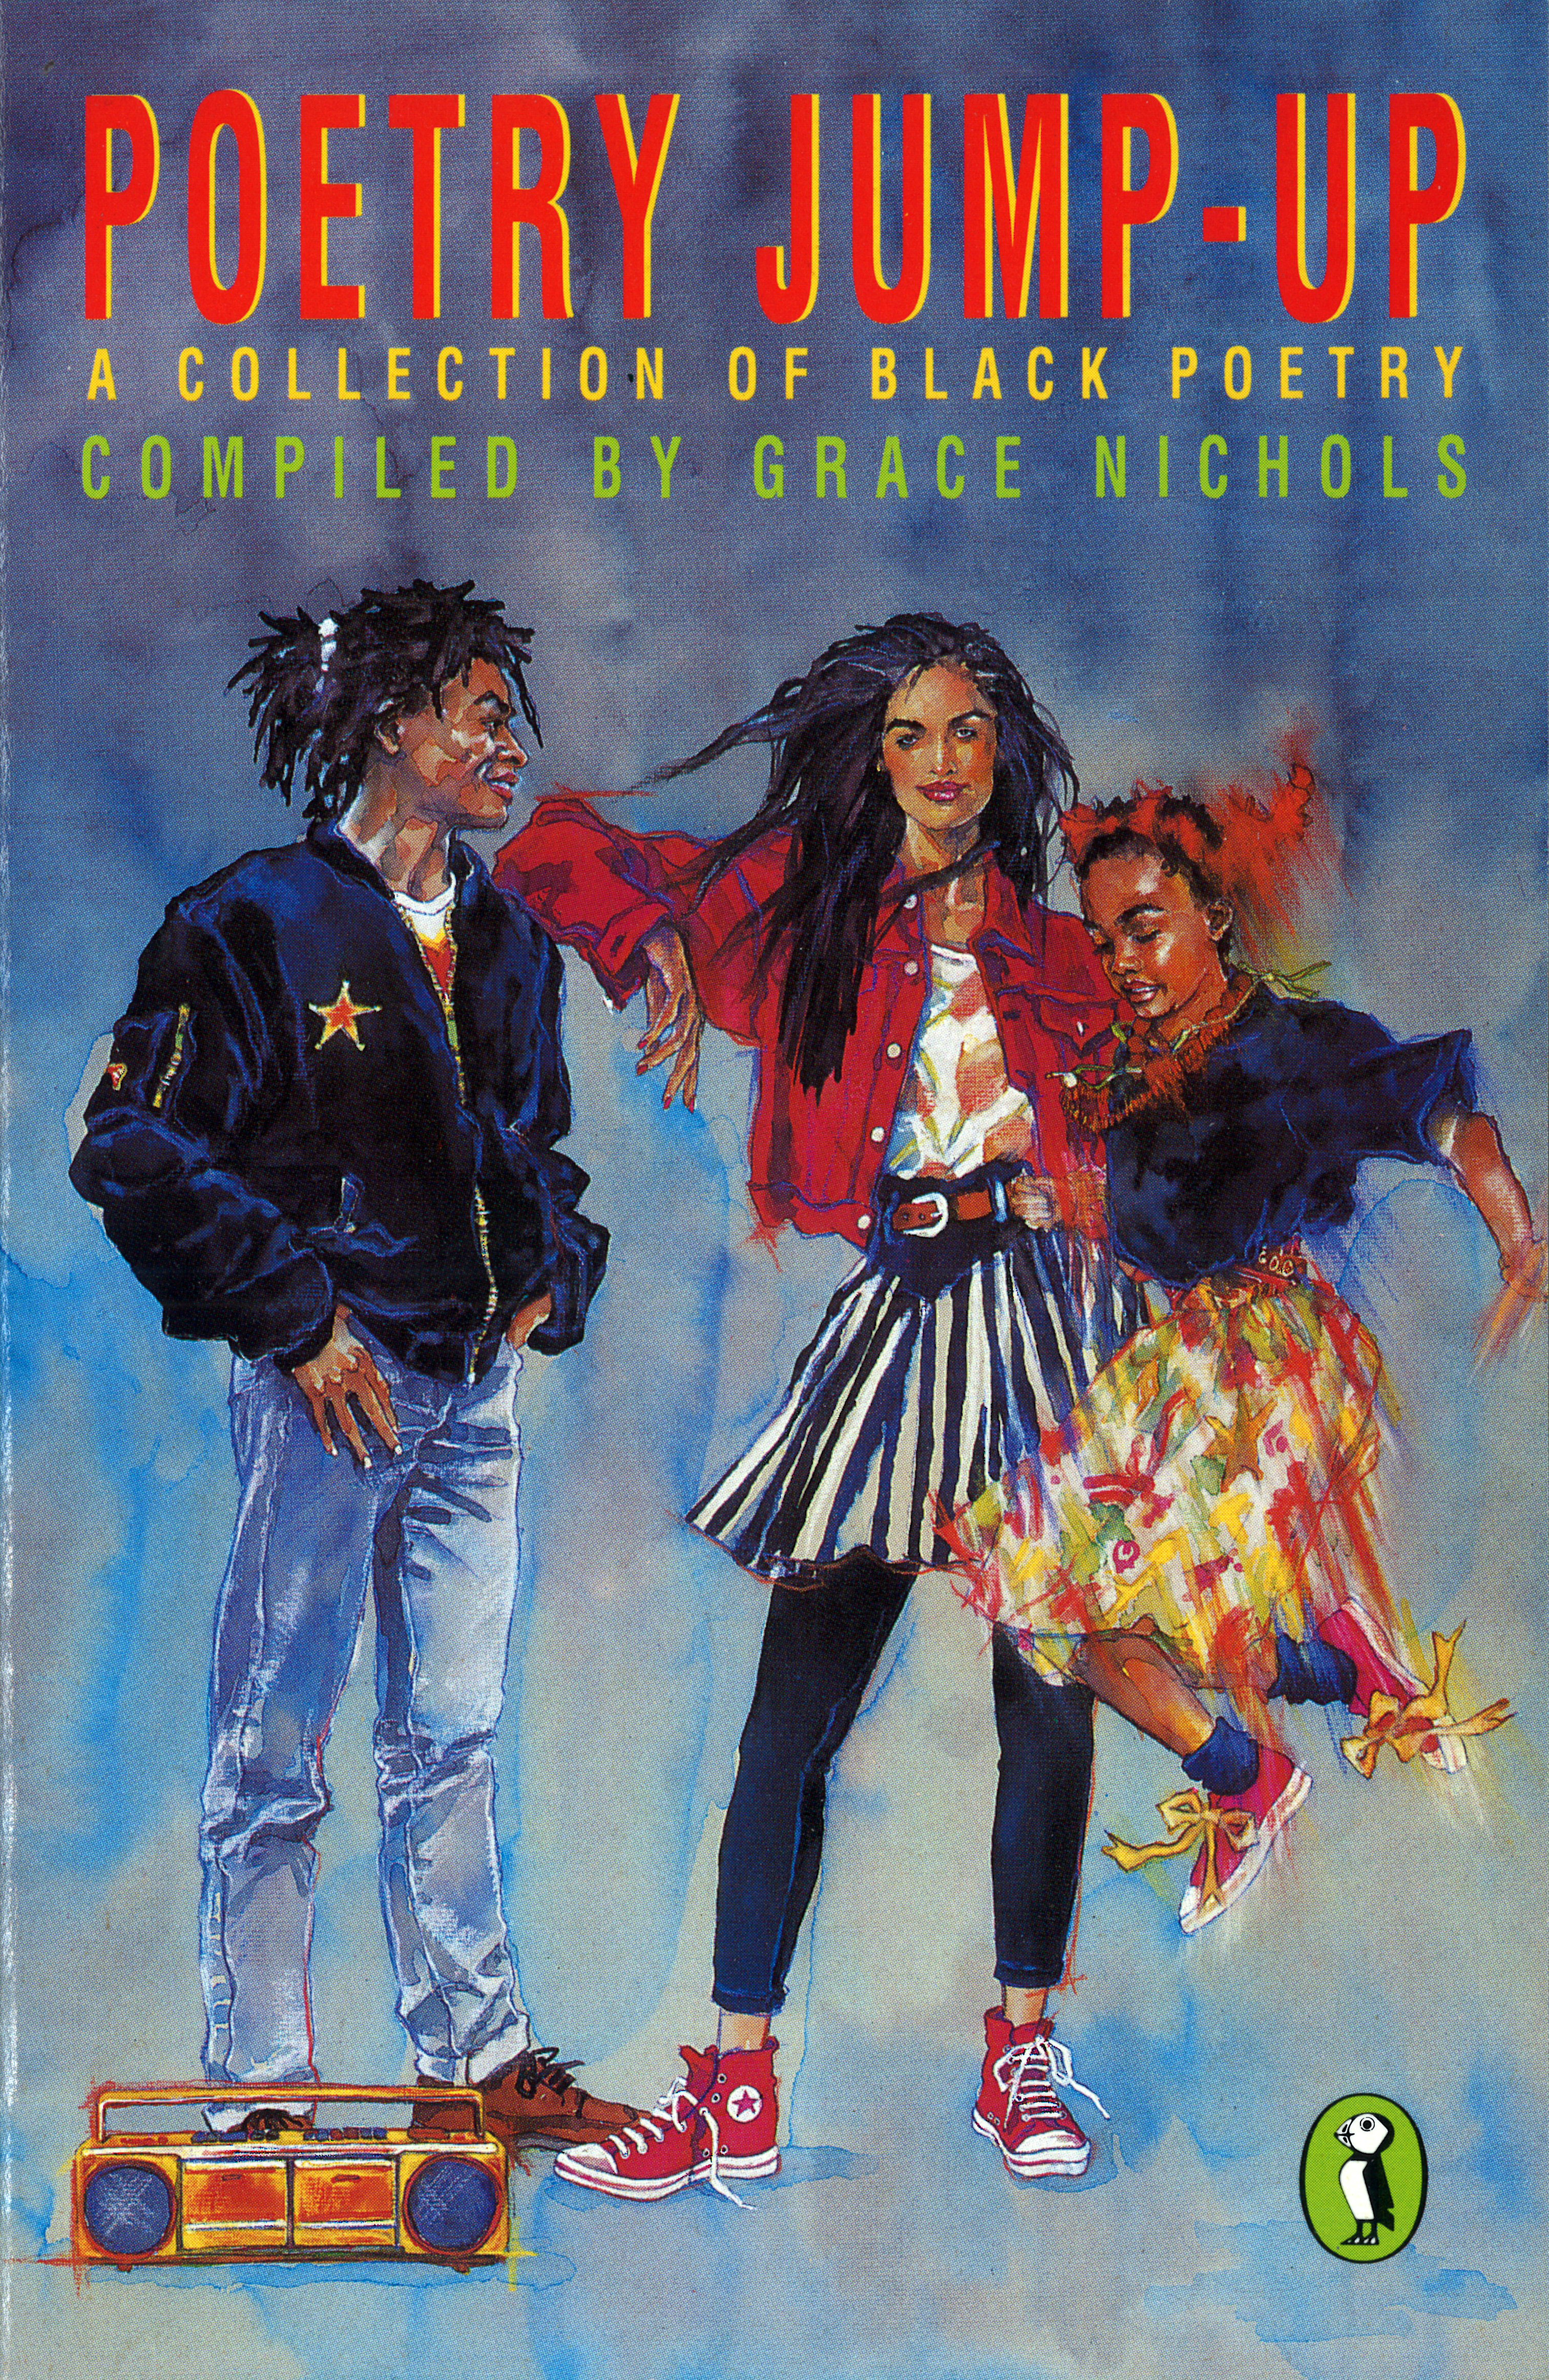 Poetry Jump-Up by Grace Nichols, Puffin 1990